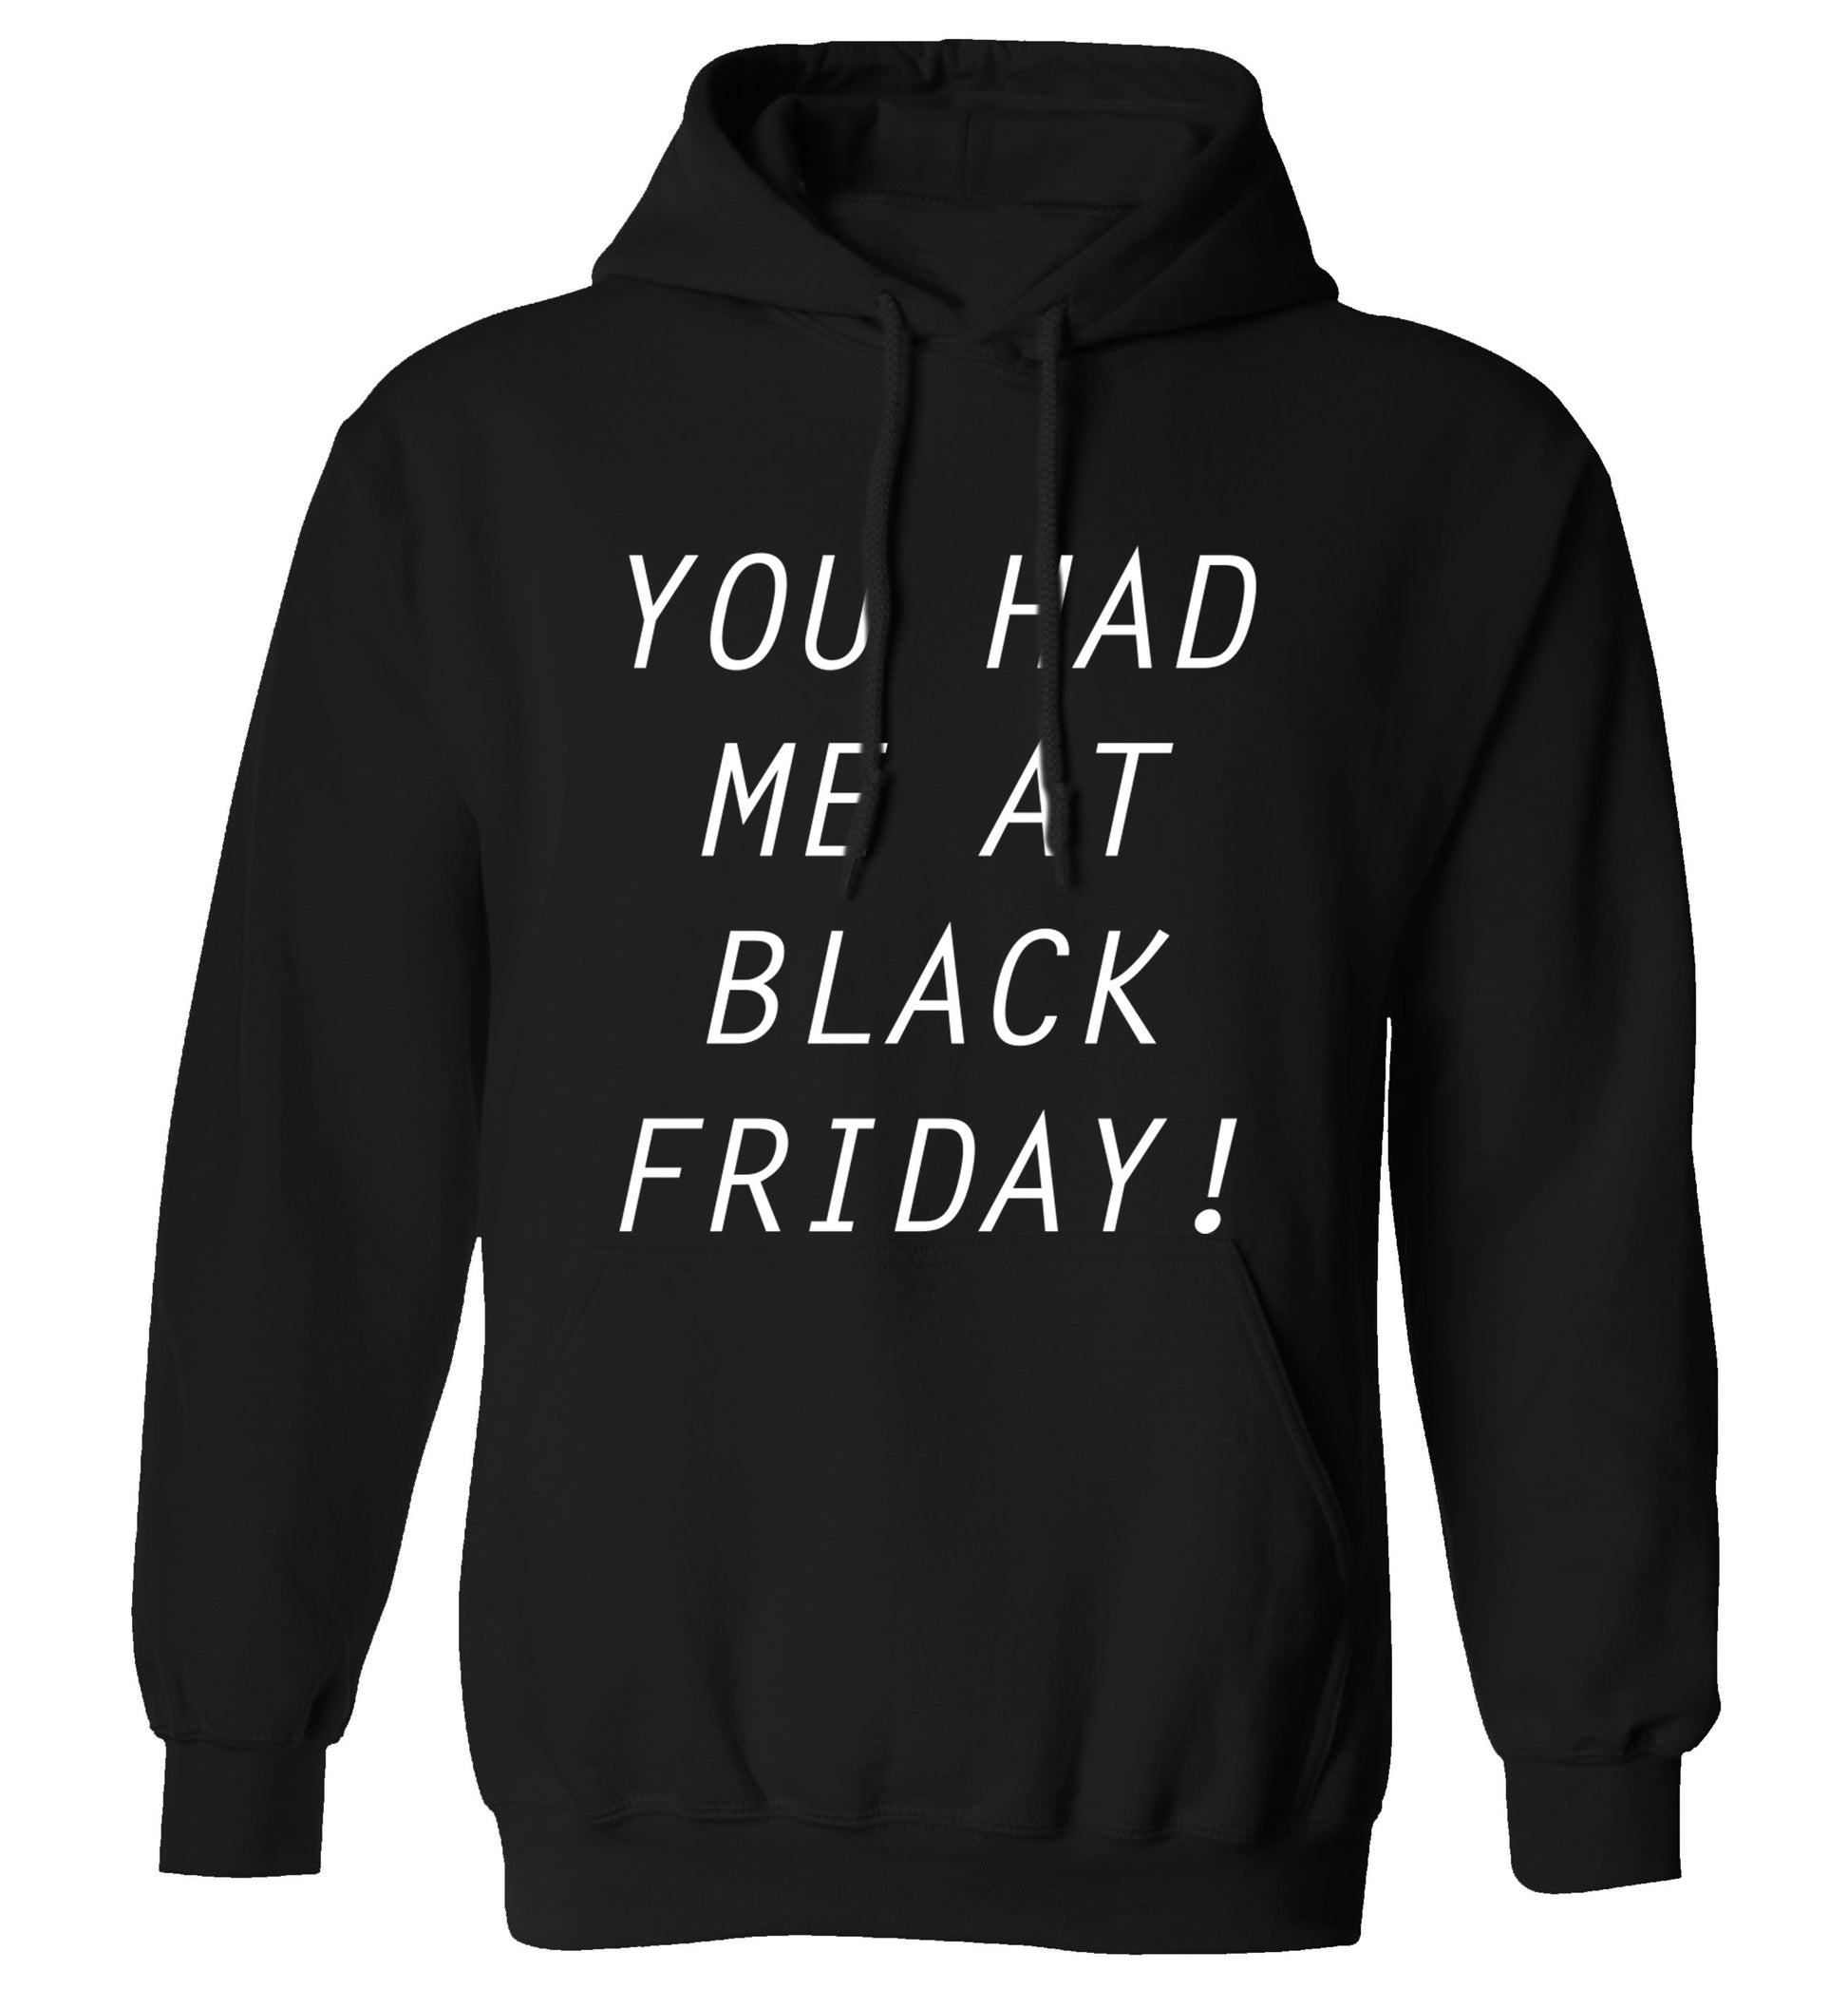 You had me at black friday adults unisex black hoodie 2XL